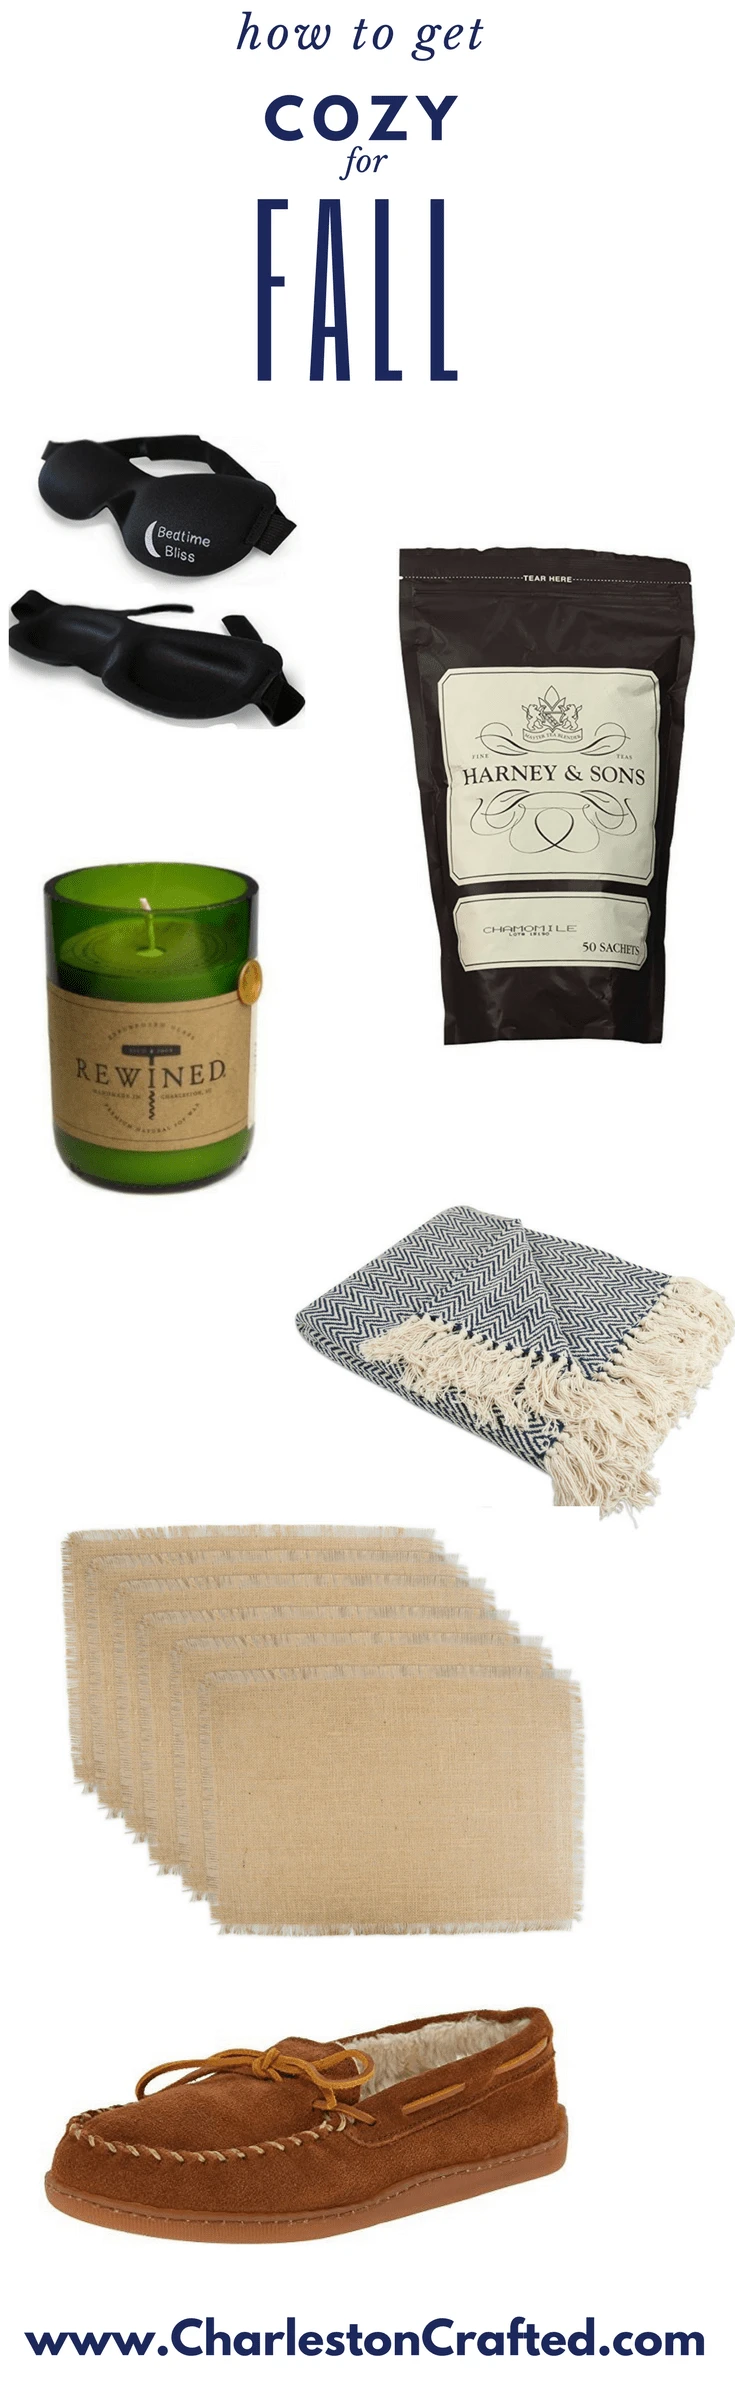 My Favorite Ways to get Cozy for Fall via Charleston Crafted